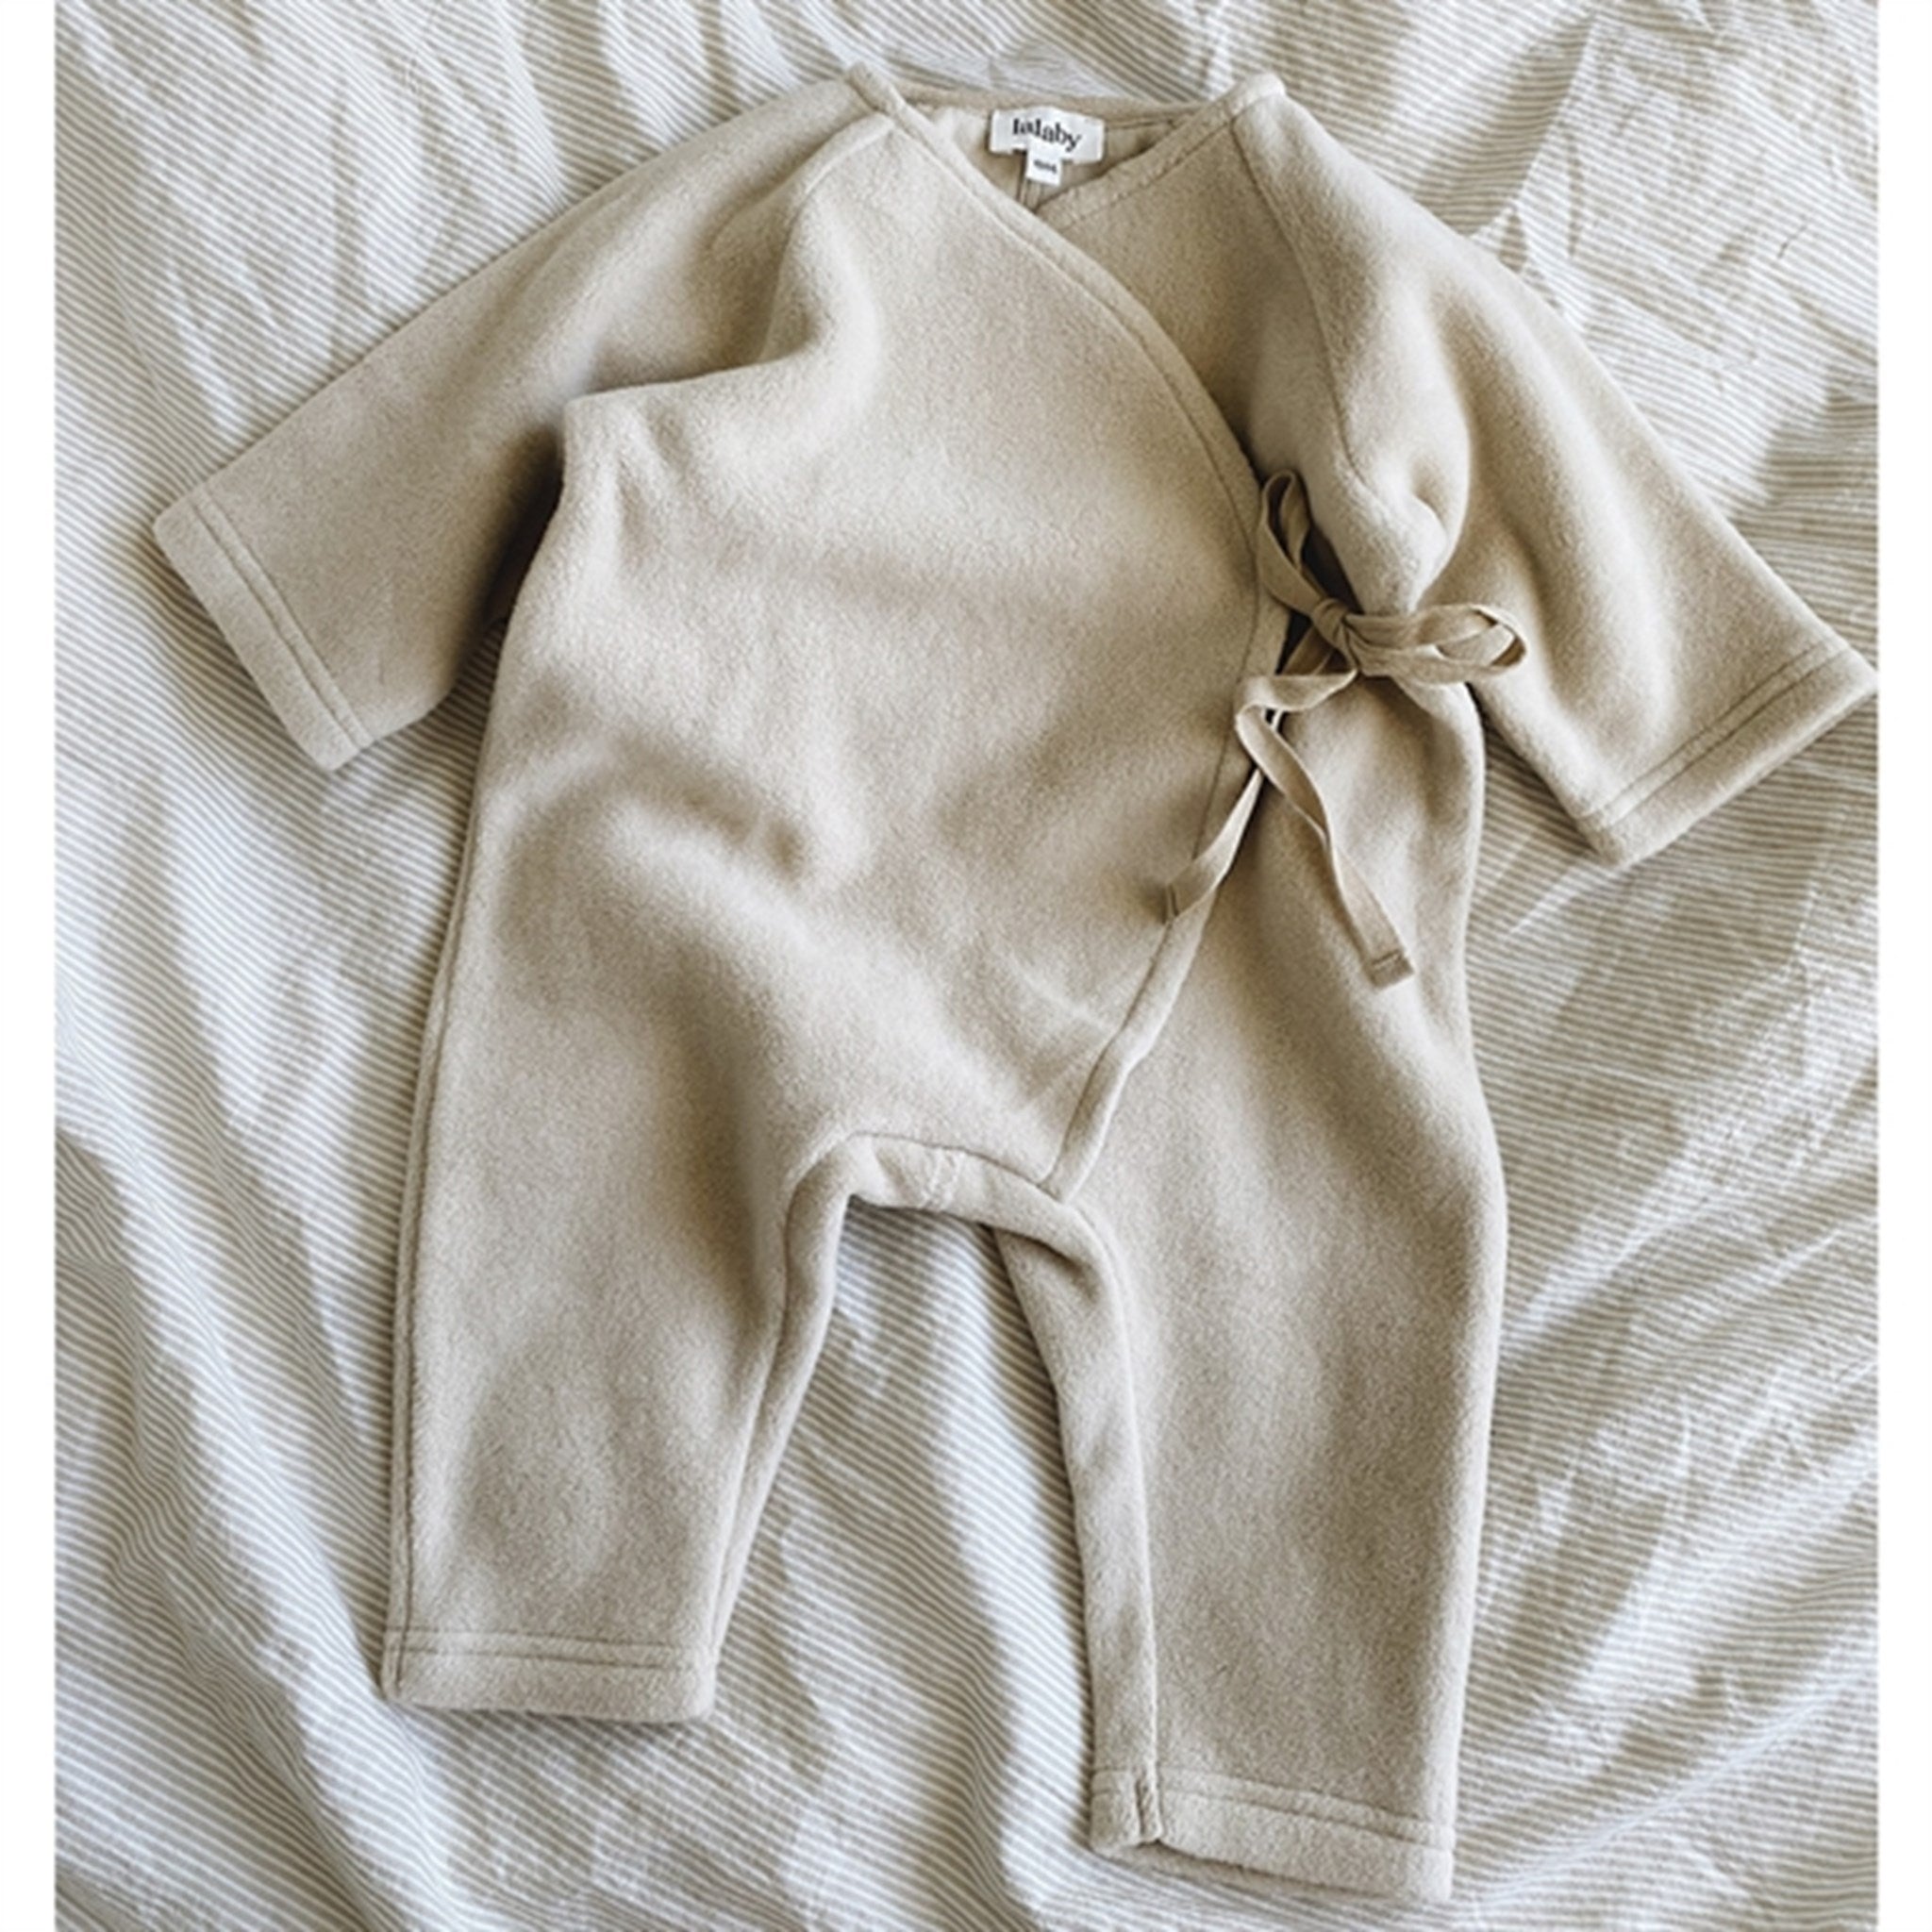 lalaby Ivory Memphis Fleece Suit 5